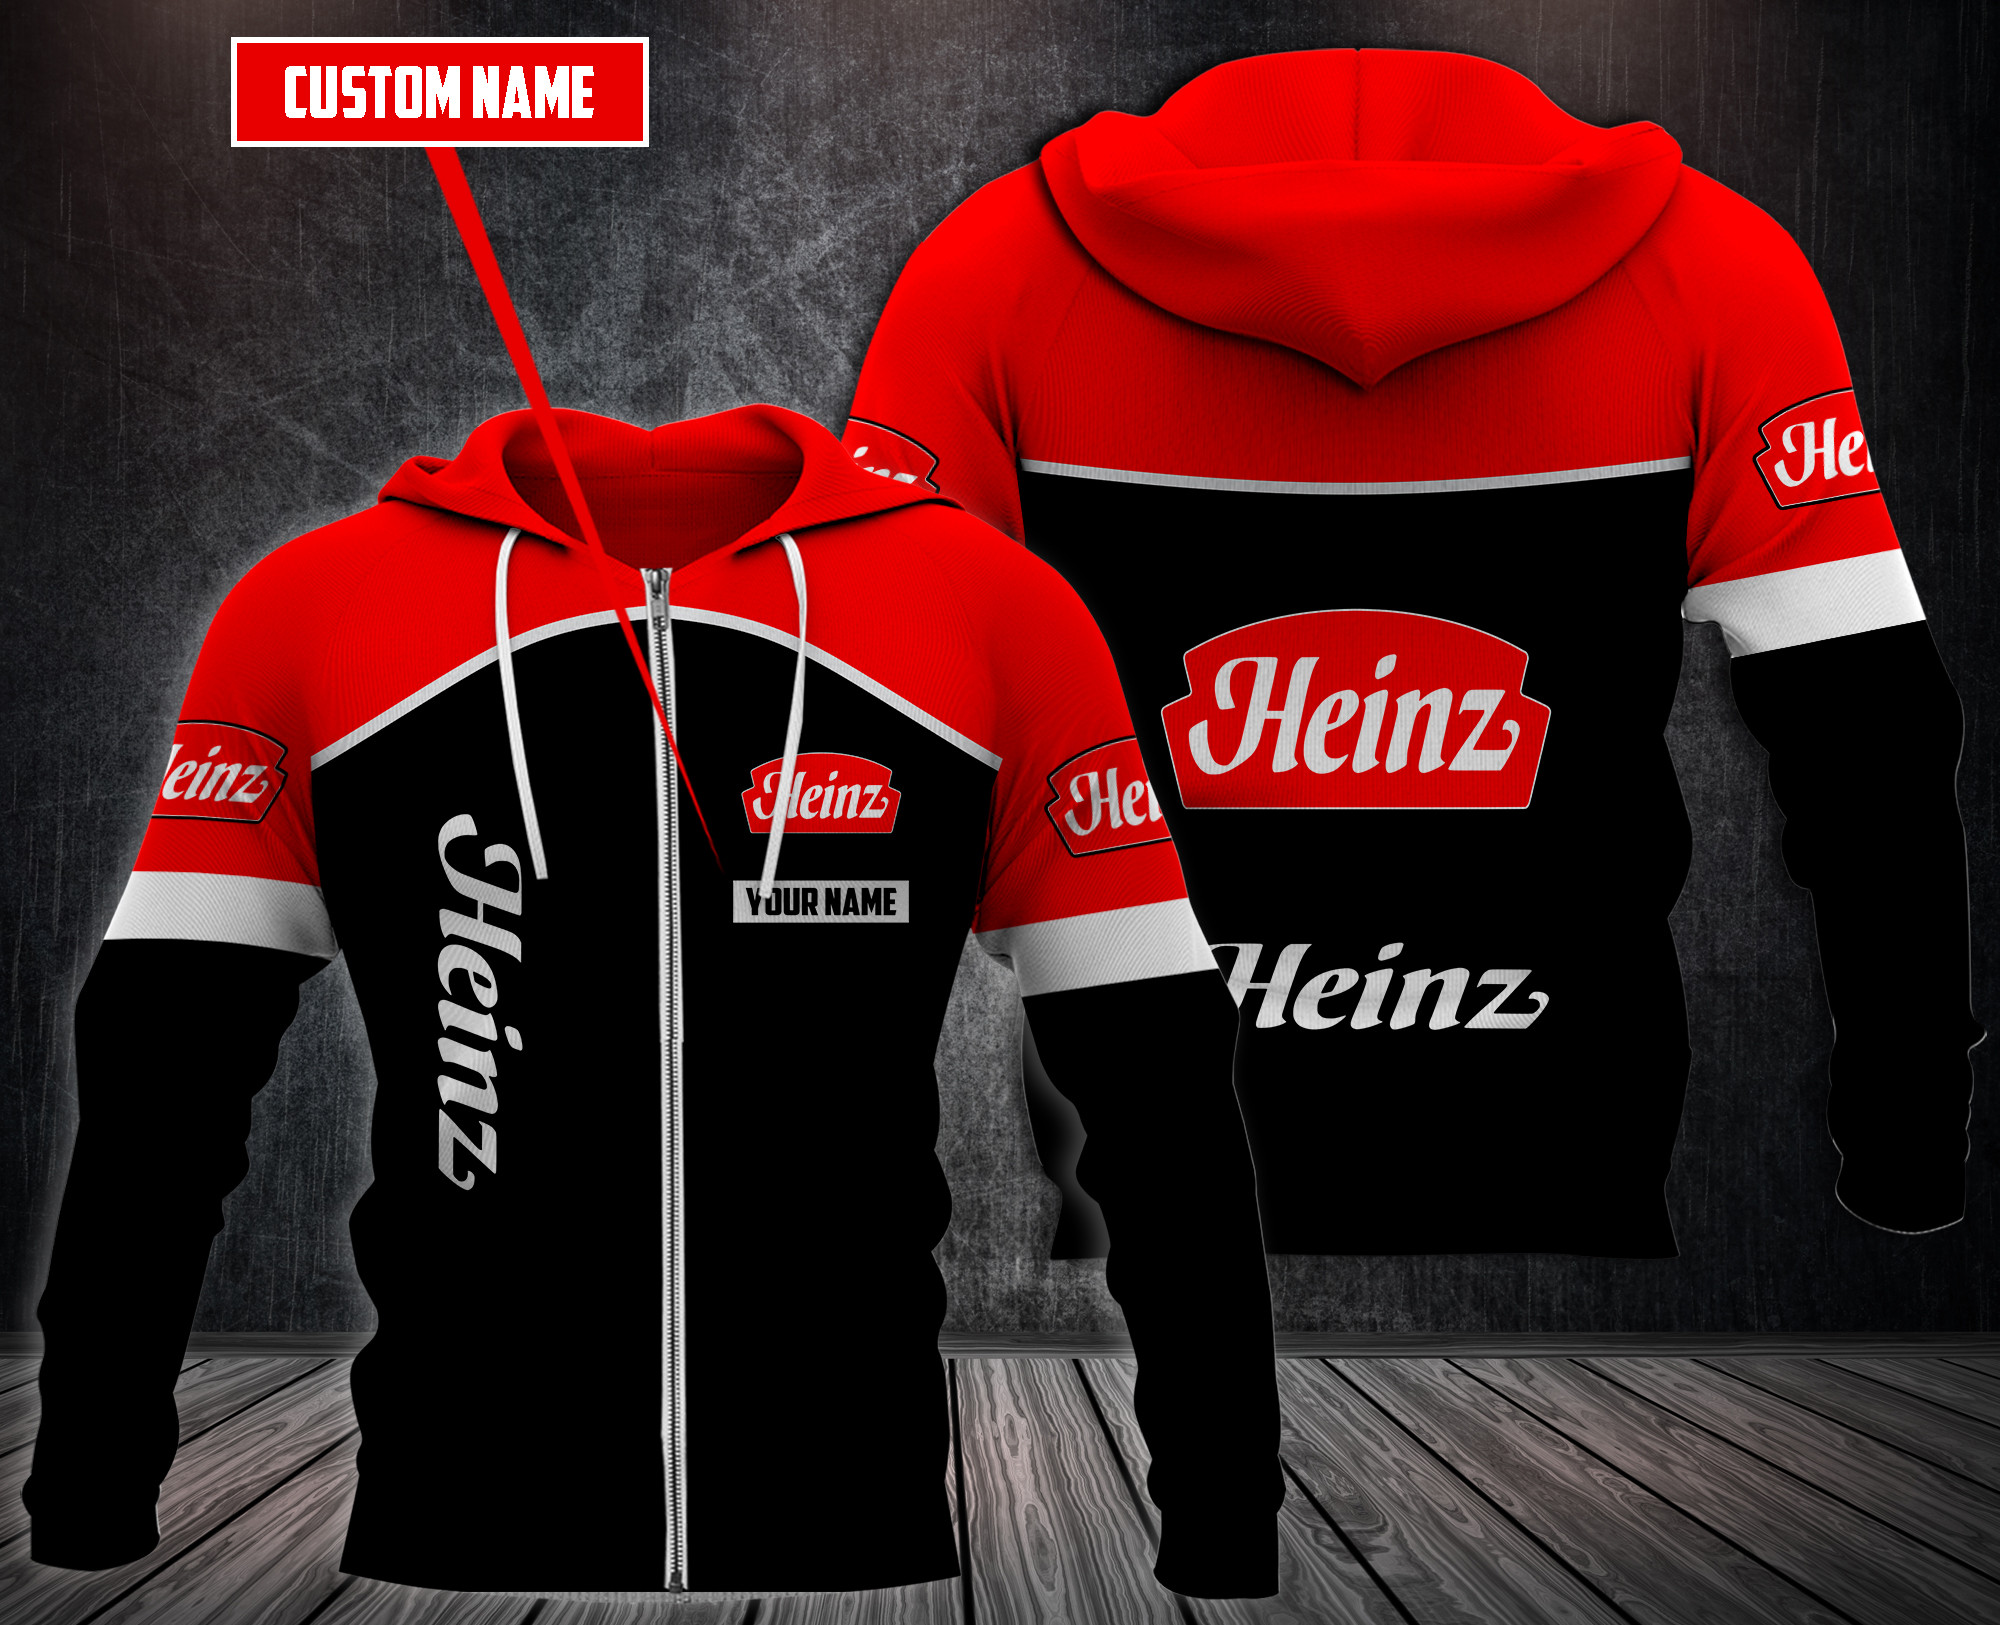 Choose the right hoodies for you on our boxboxshirt and ethershirt websites in 2022 102